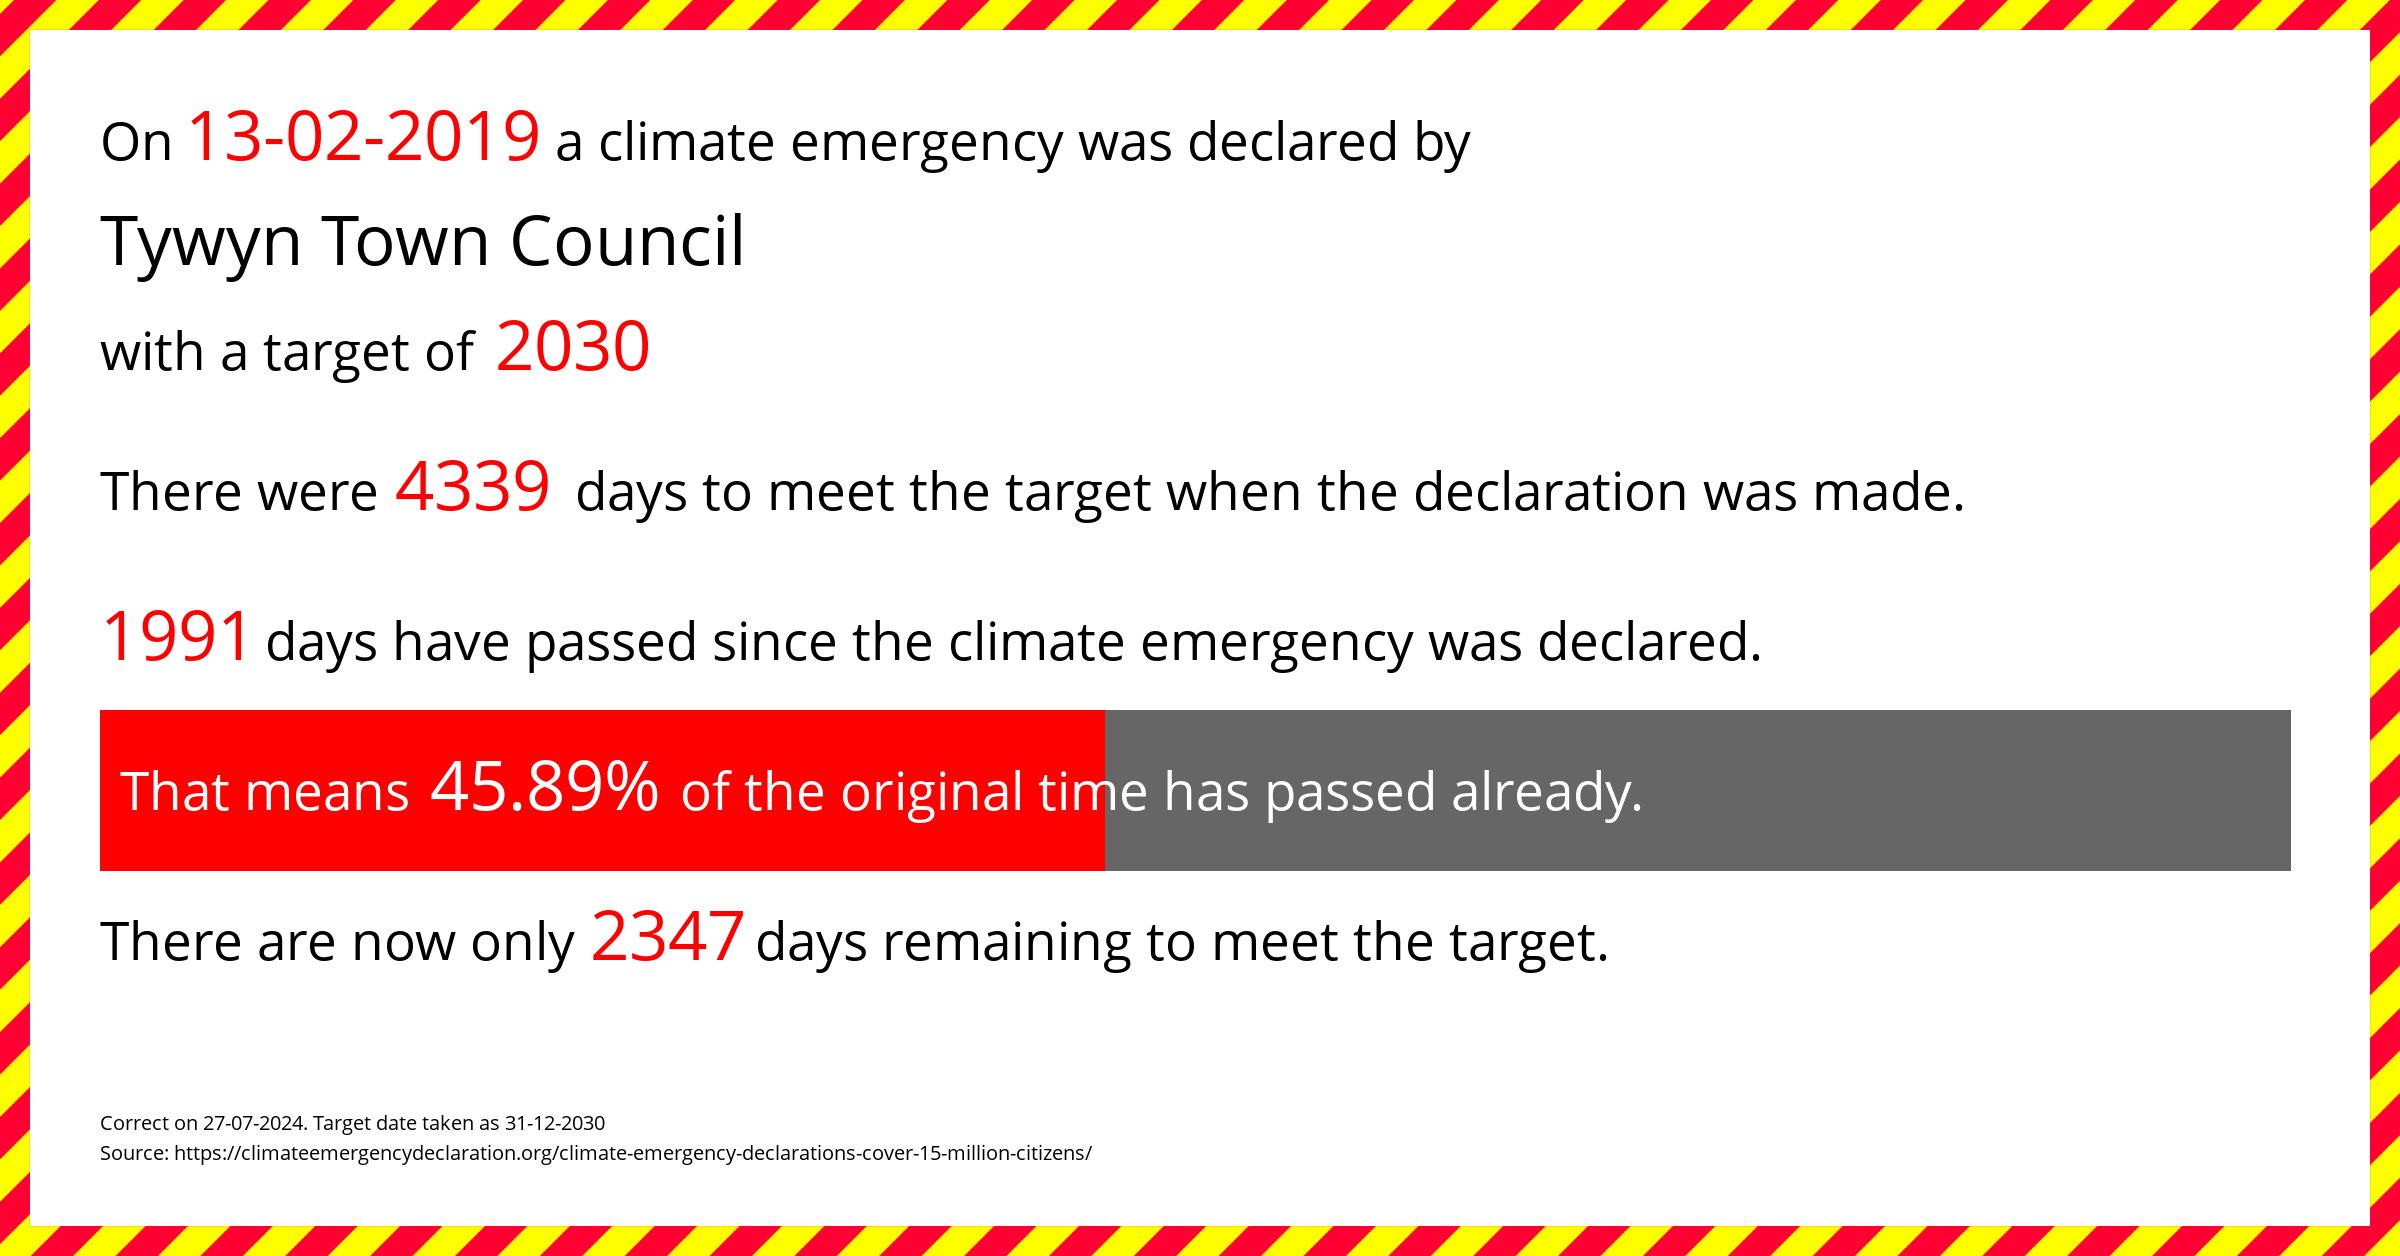 Tywyn Town Council declared a Climate emergency on Wednesday 13th February 2019, with a target of 2030.